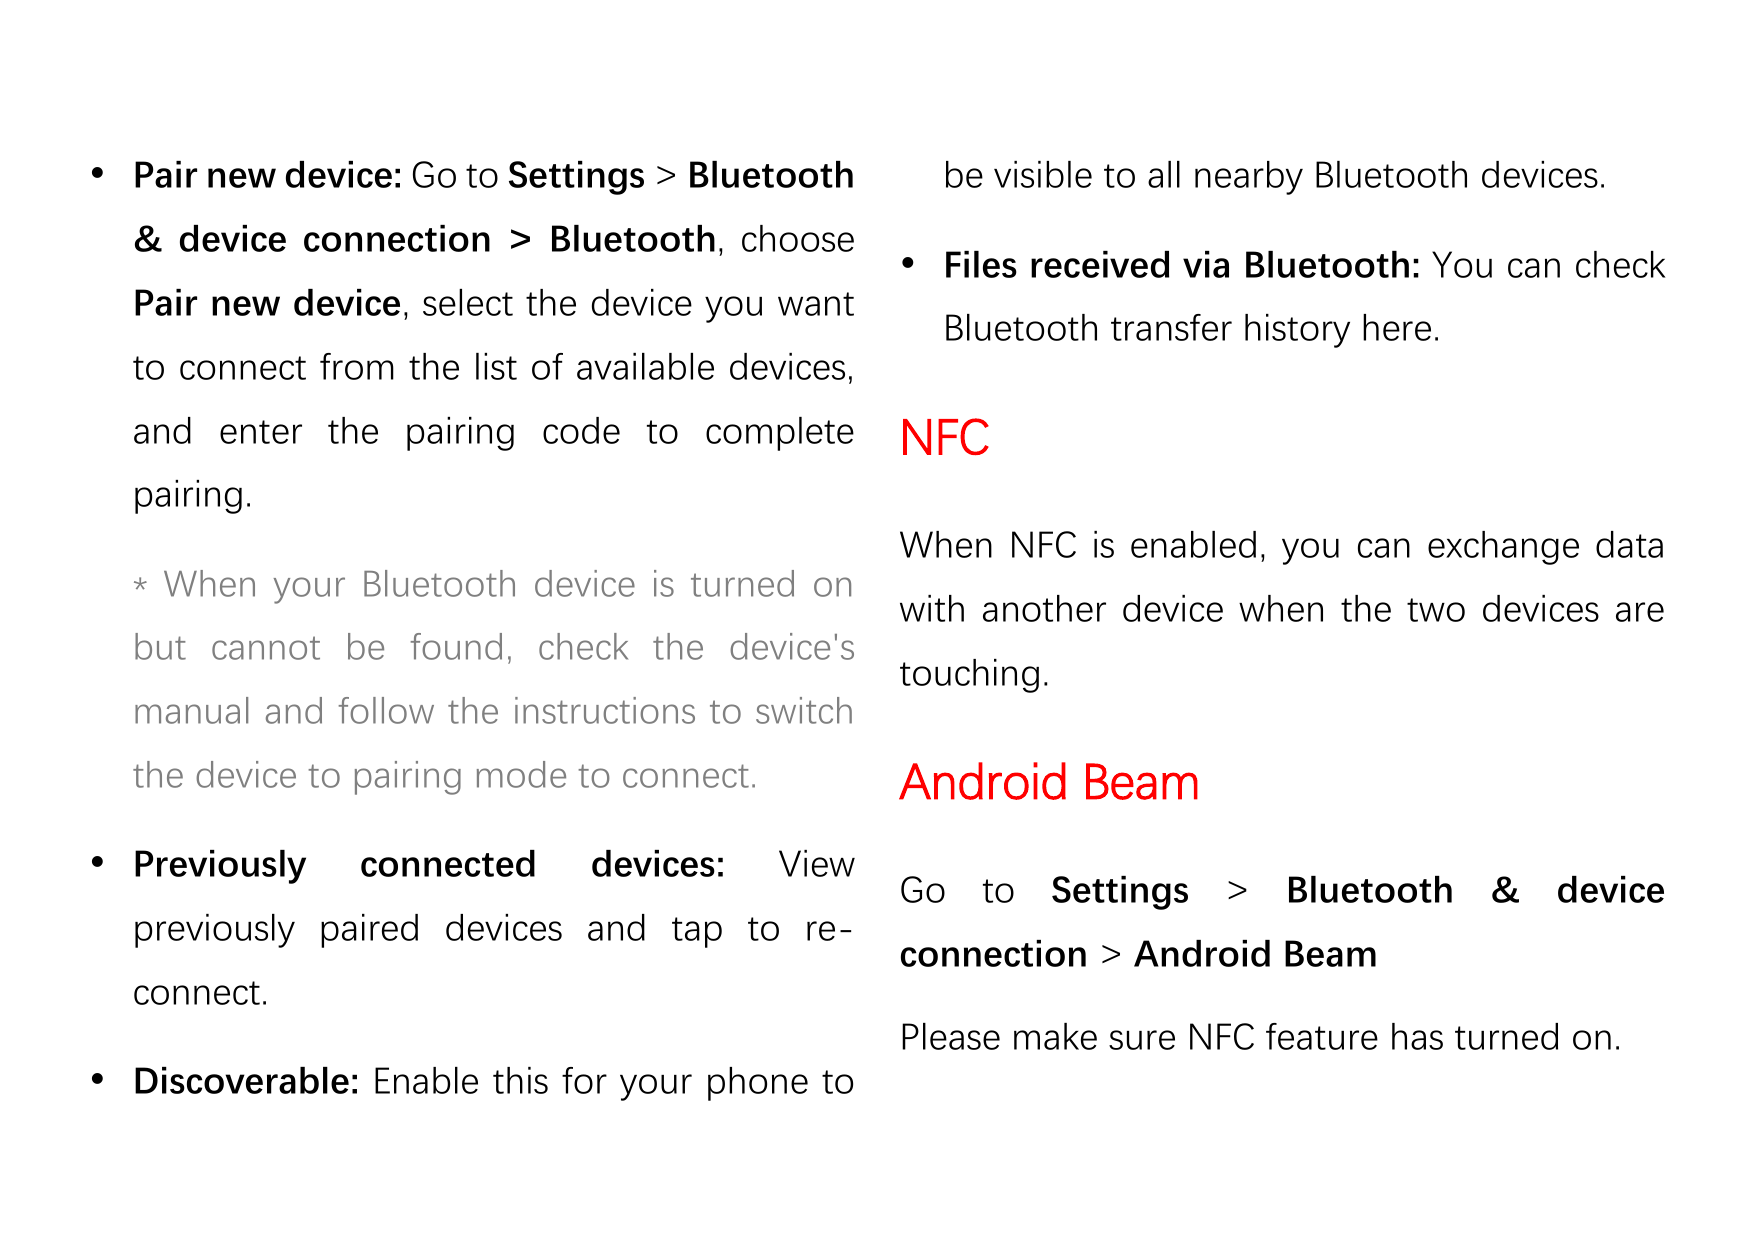  Pair new device: Go to Settings > Bluetooth& device connection > Bluetooth, choosePair new device, select the device you wantt